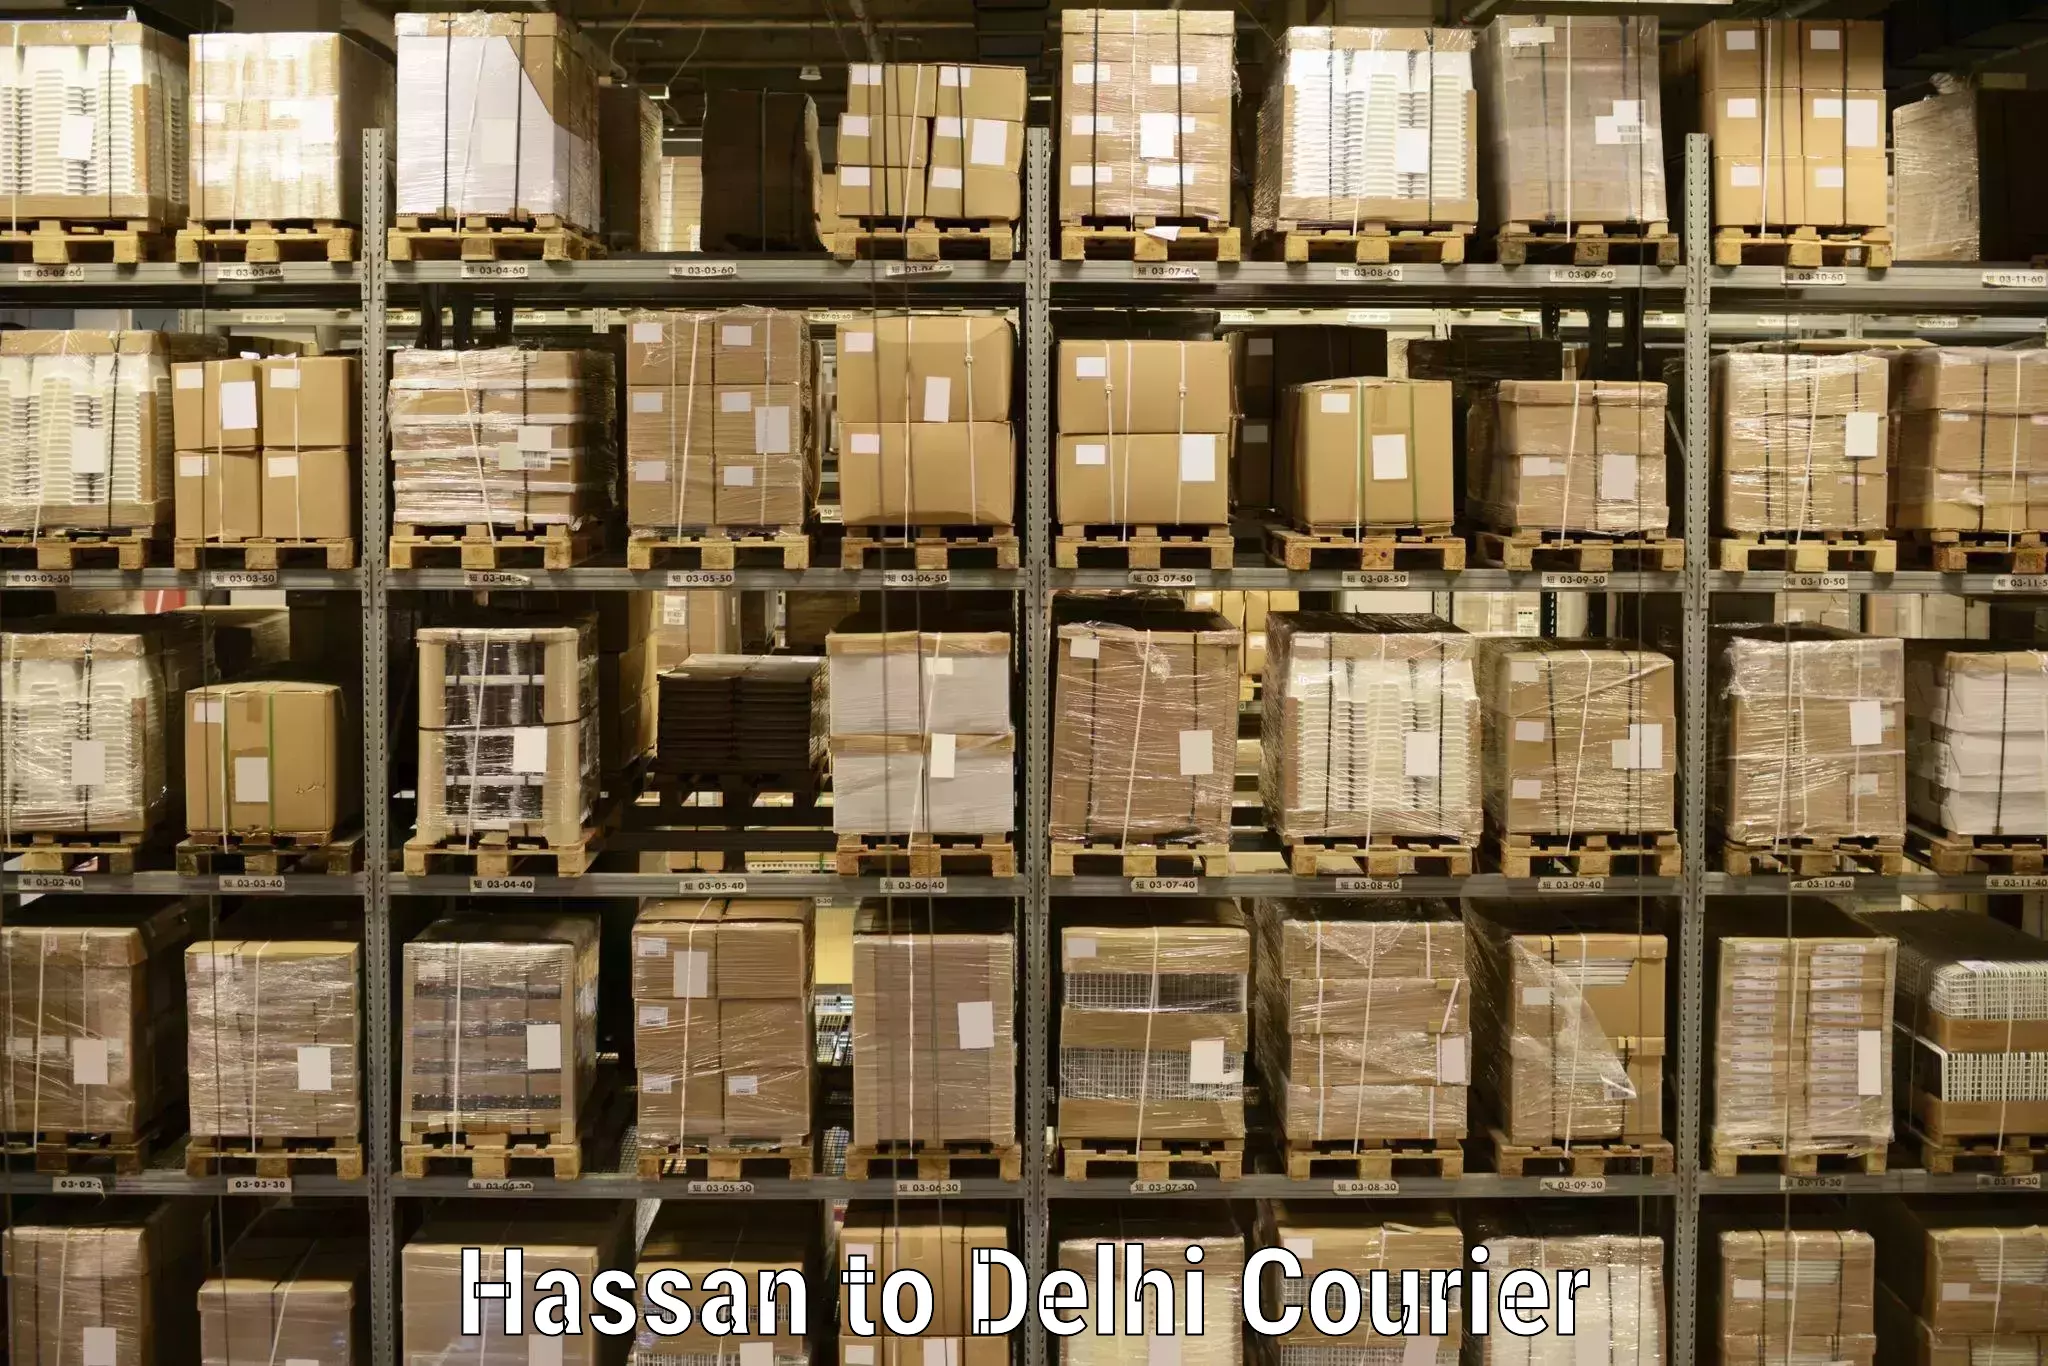 Express delivery network Hassan to Ashok Vihar